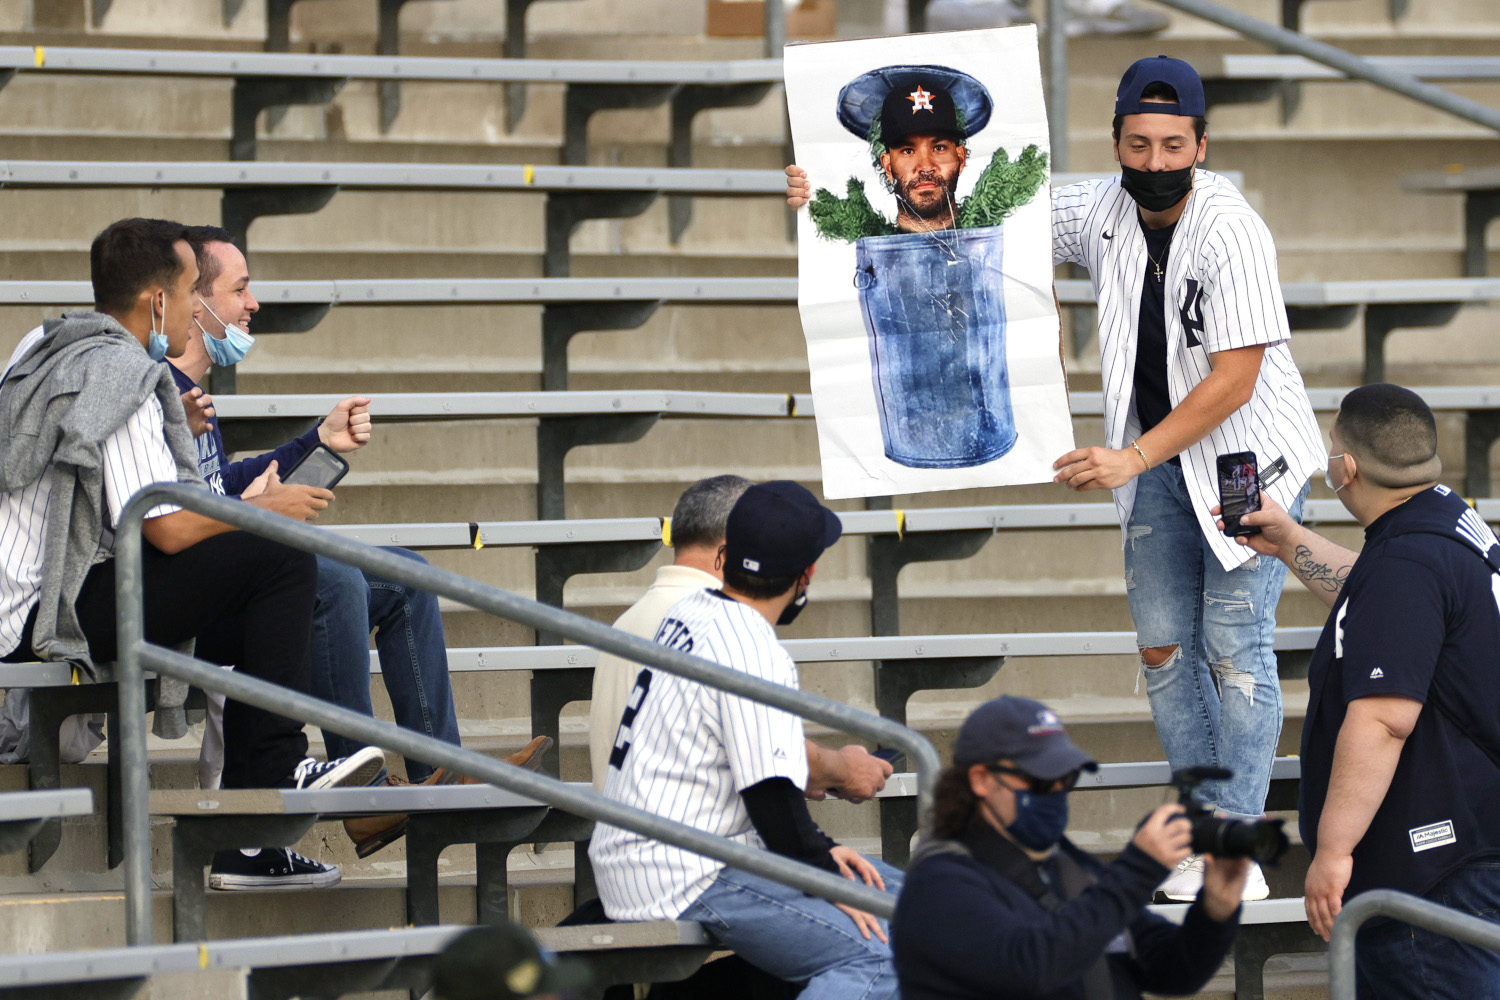 New York Yankees Fans Unleash Pent-up Frustration at Visiting Houston Astros